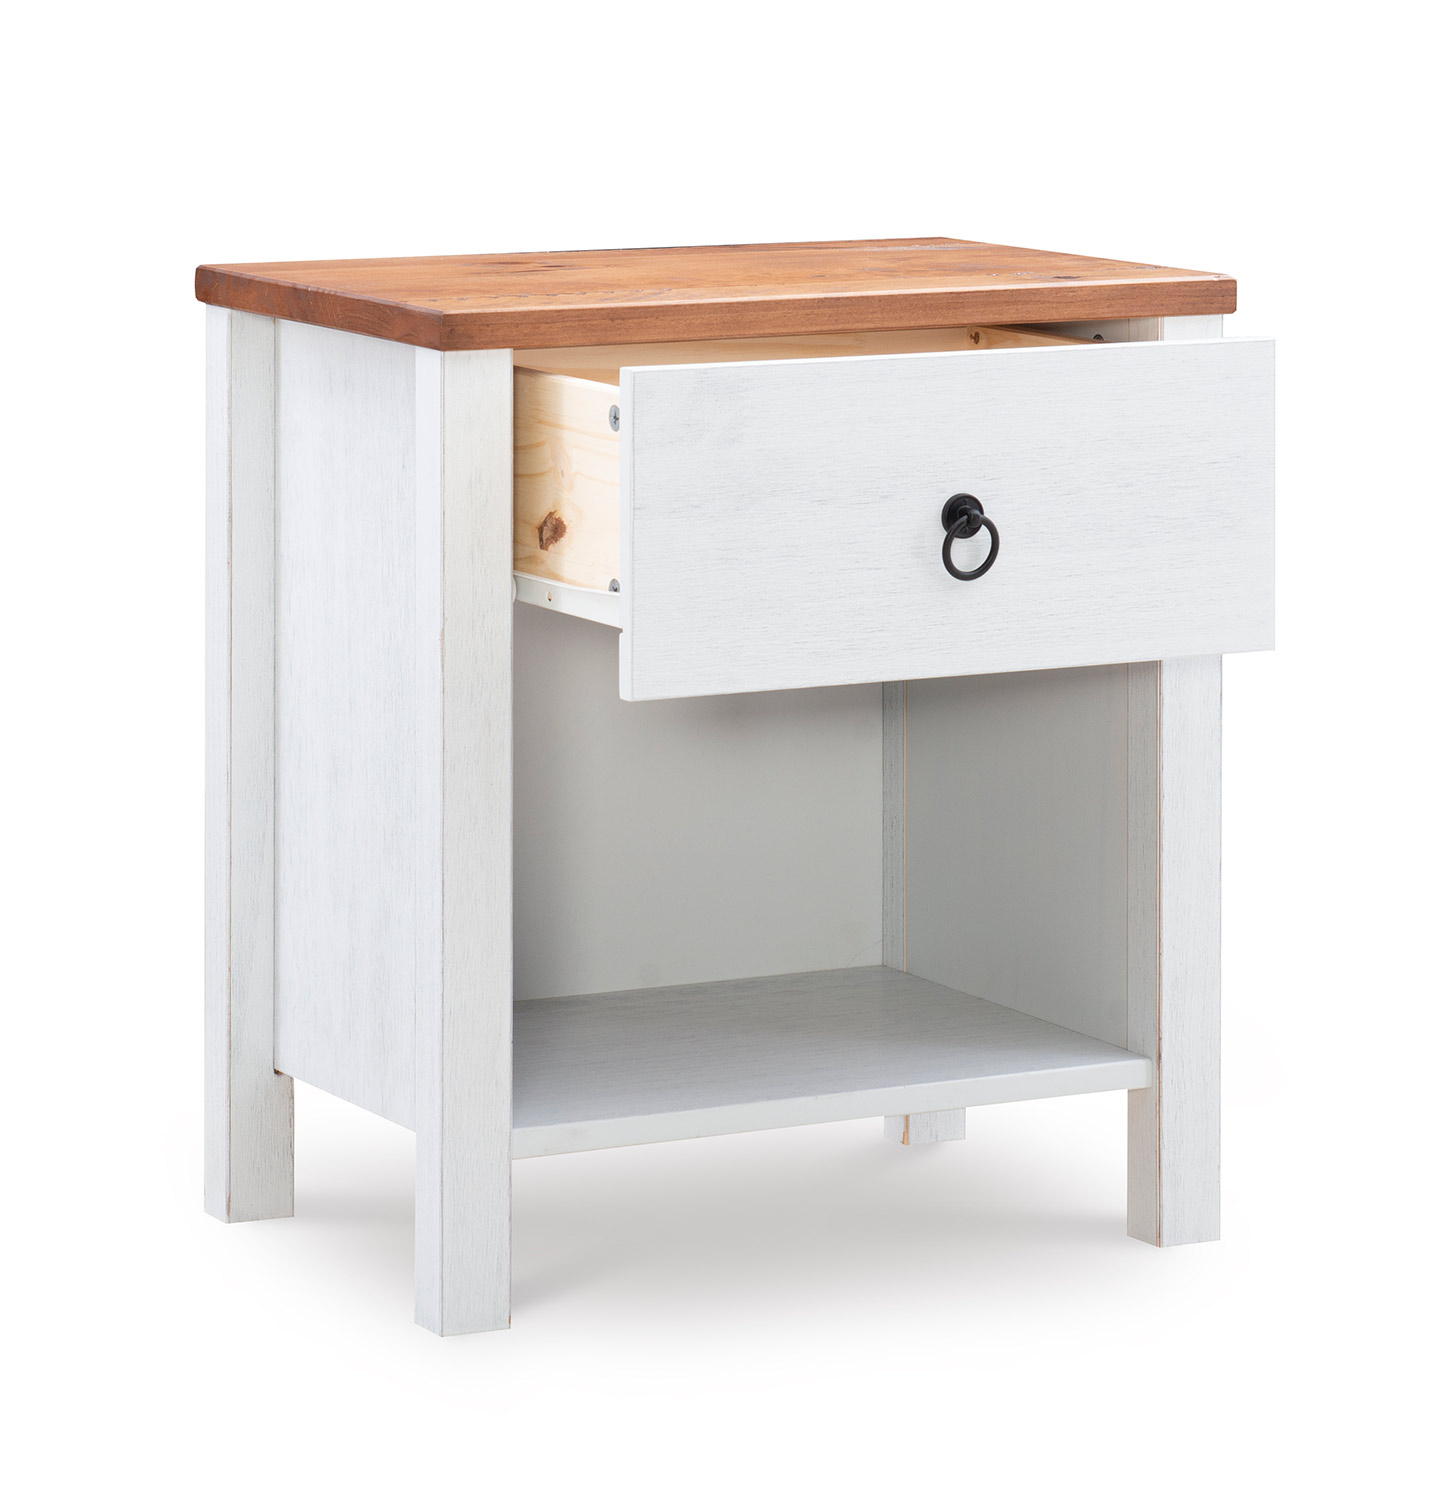 Powell Anson Nightstand - Rustic Oak/Distressed White